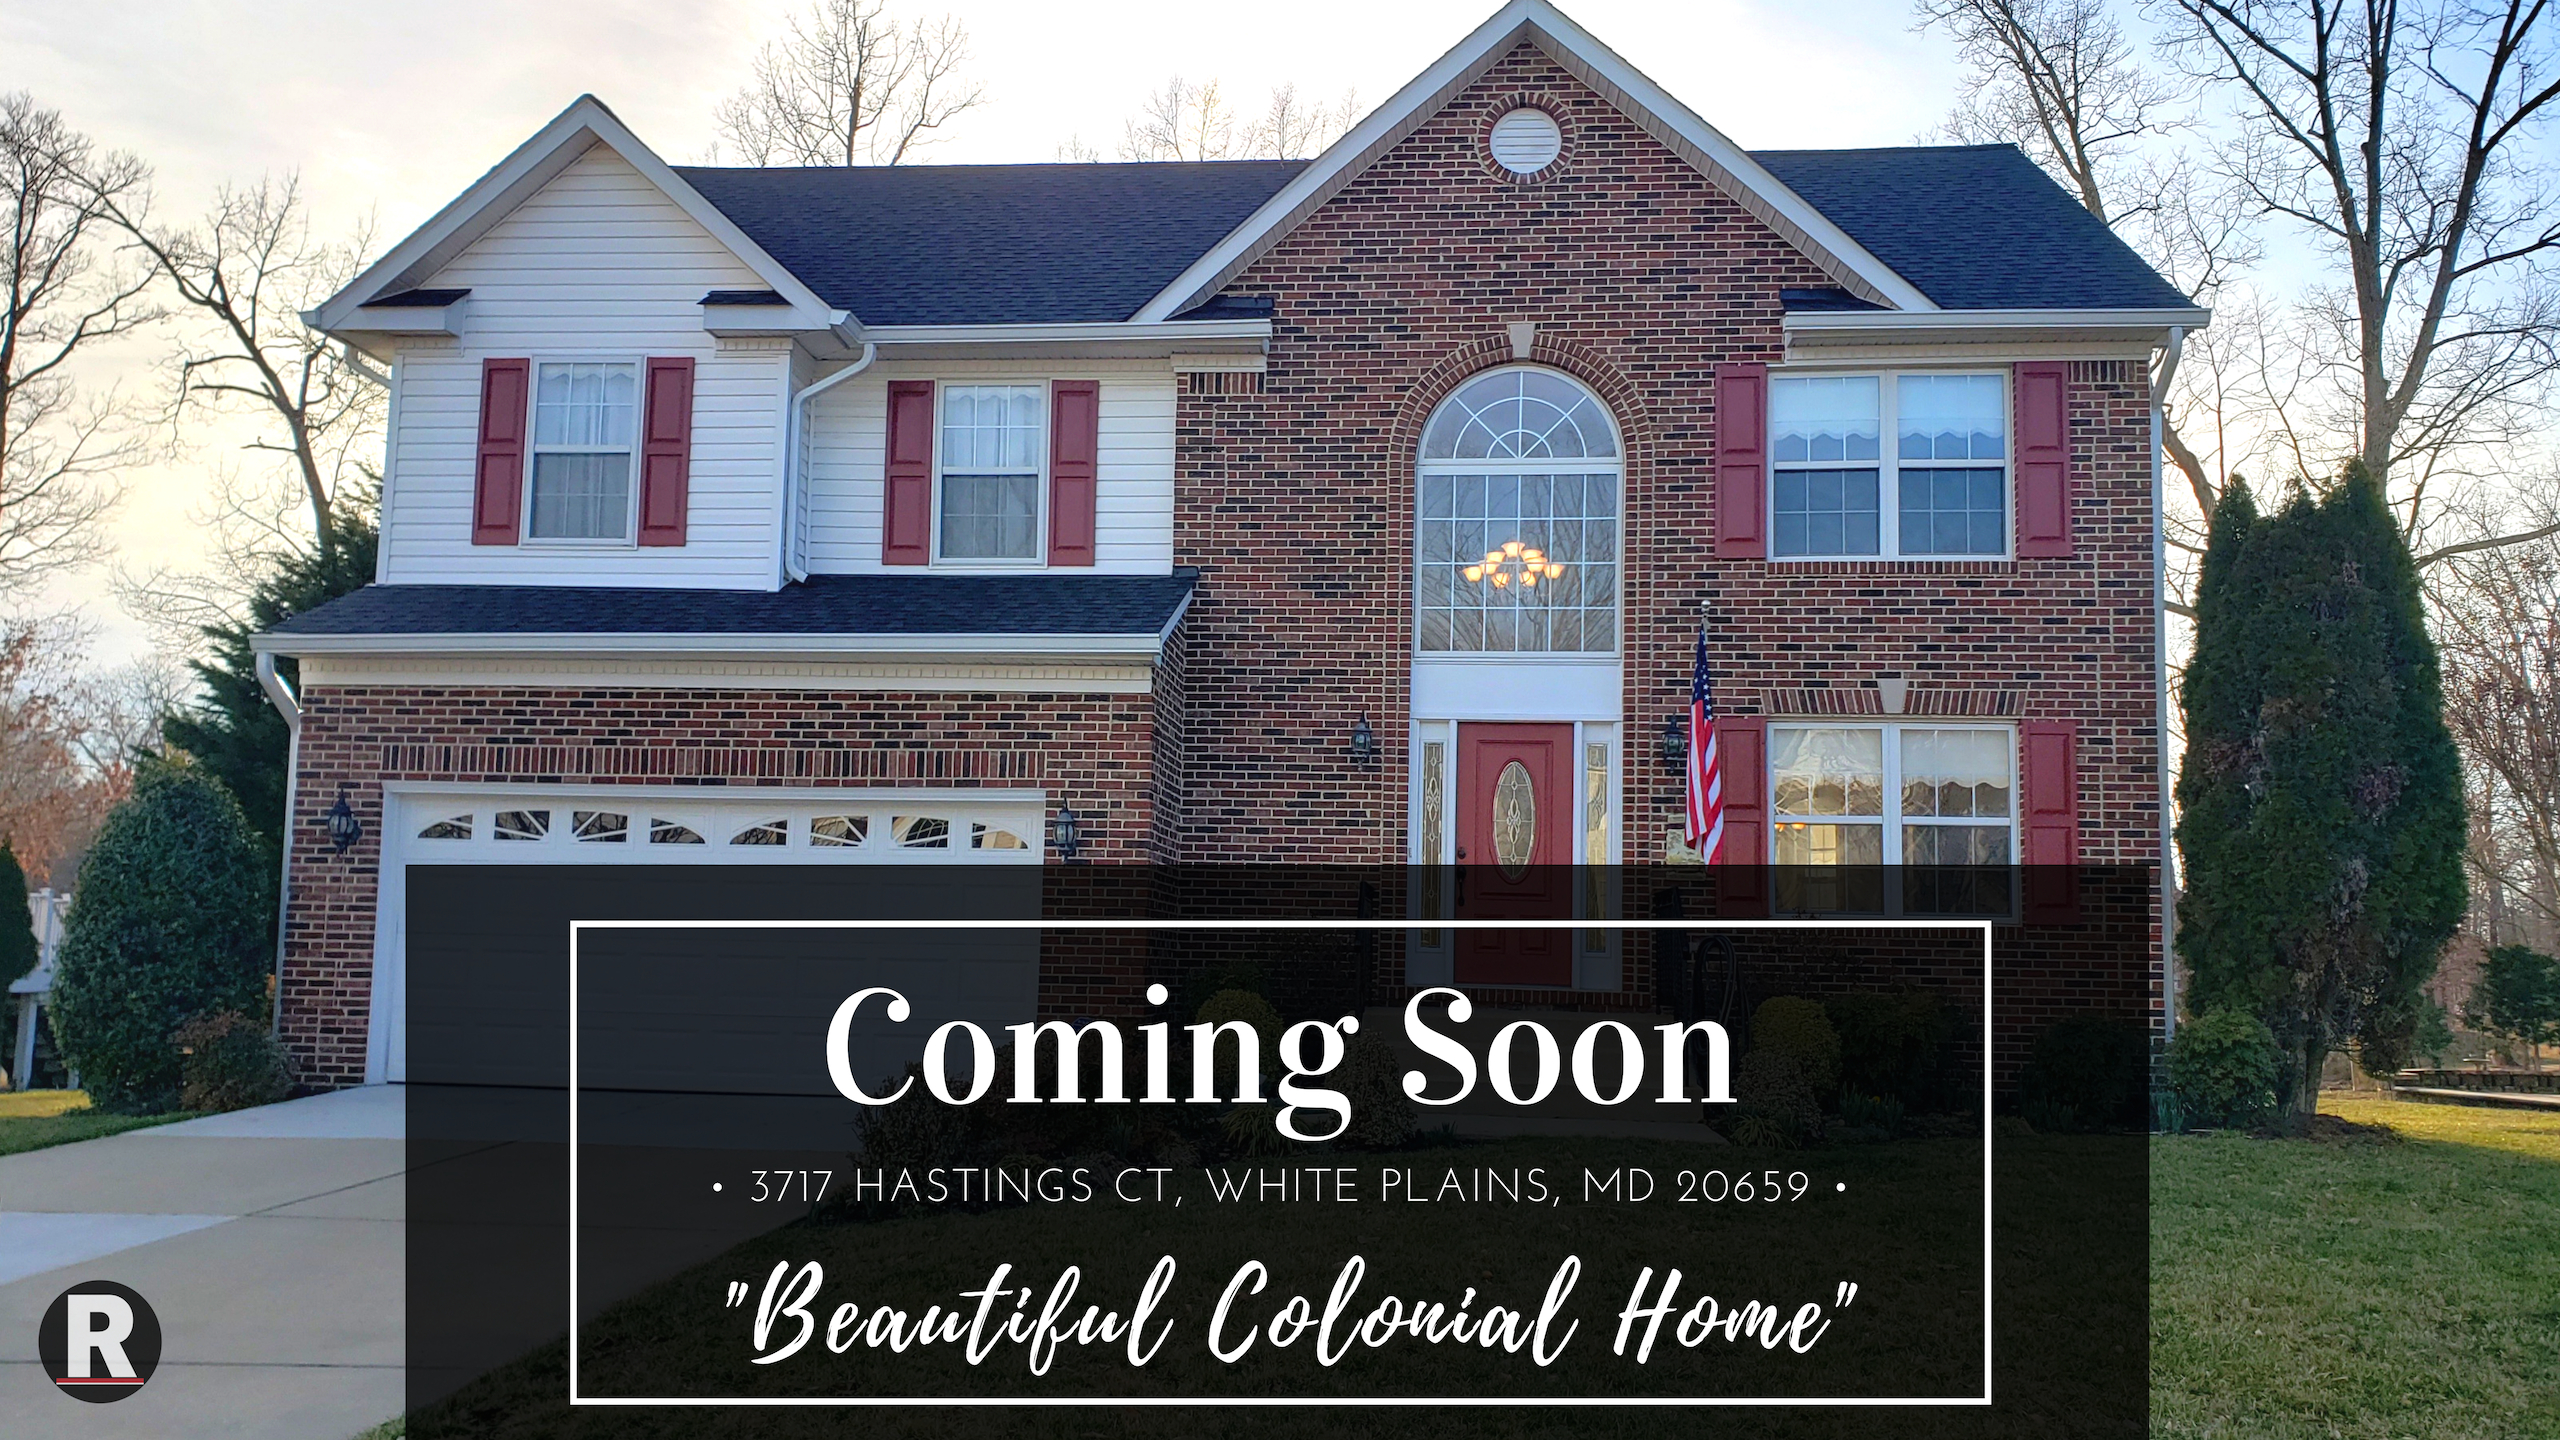 Coming Soon! 3717 Hastings Ct, White Plains, MD 20659